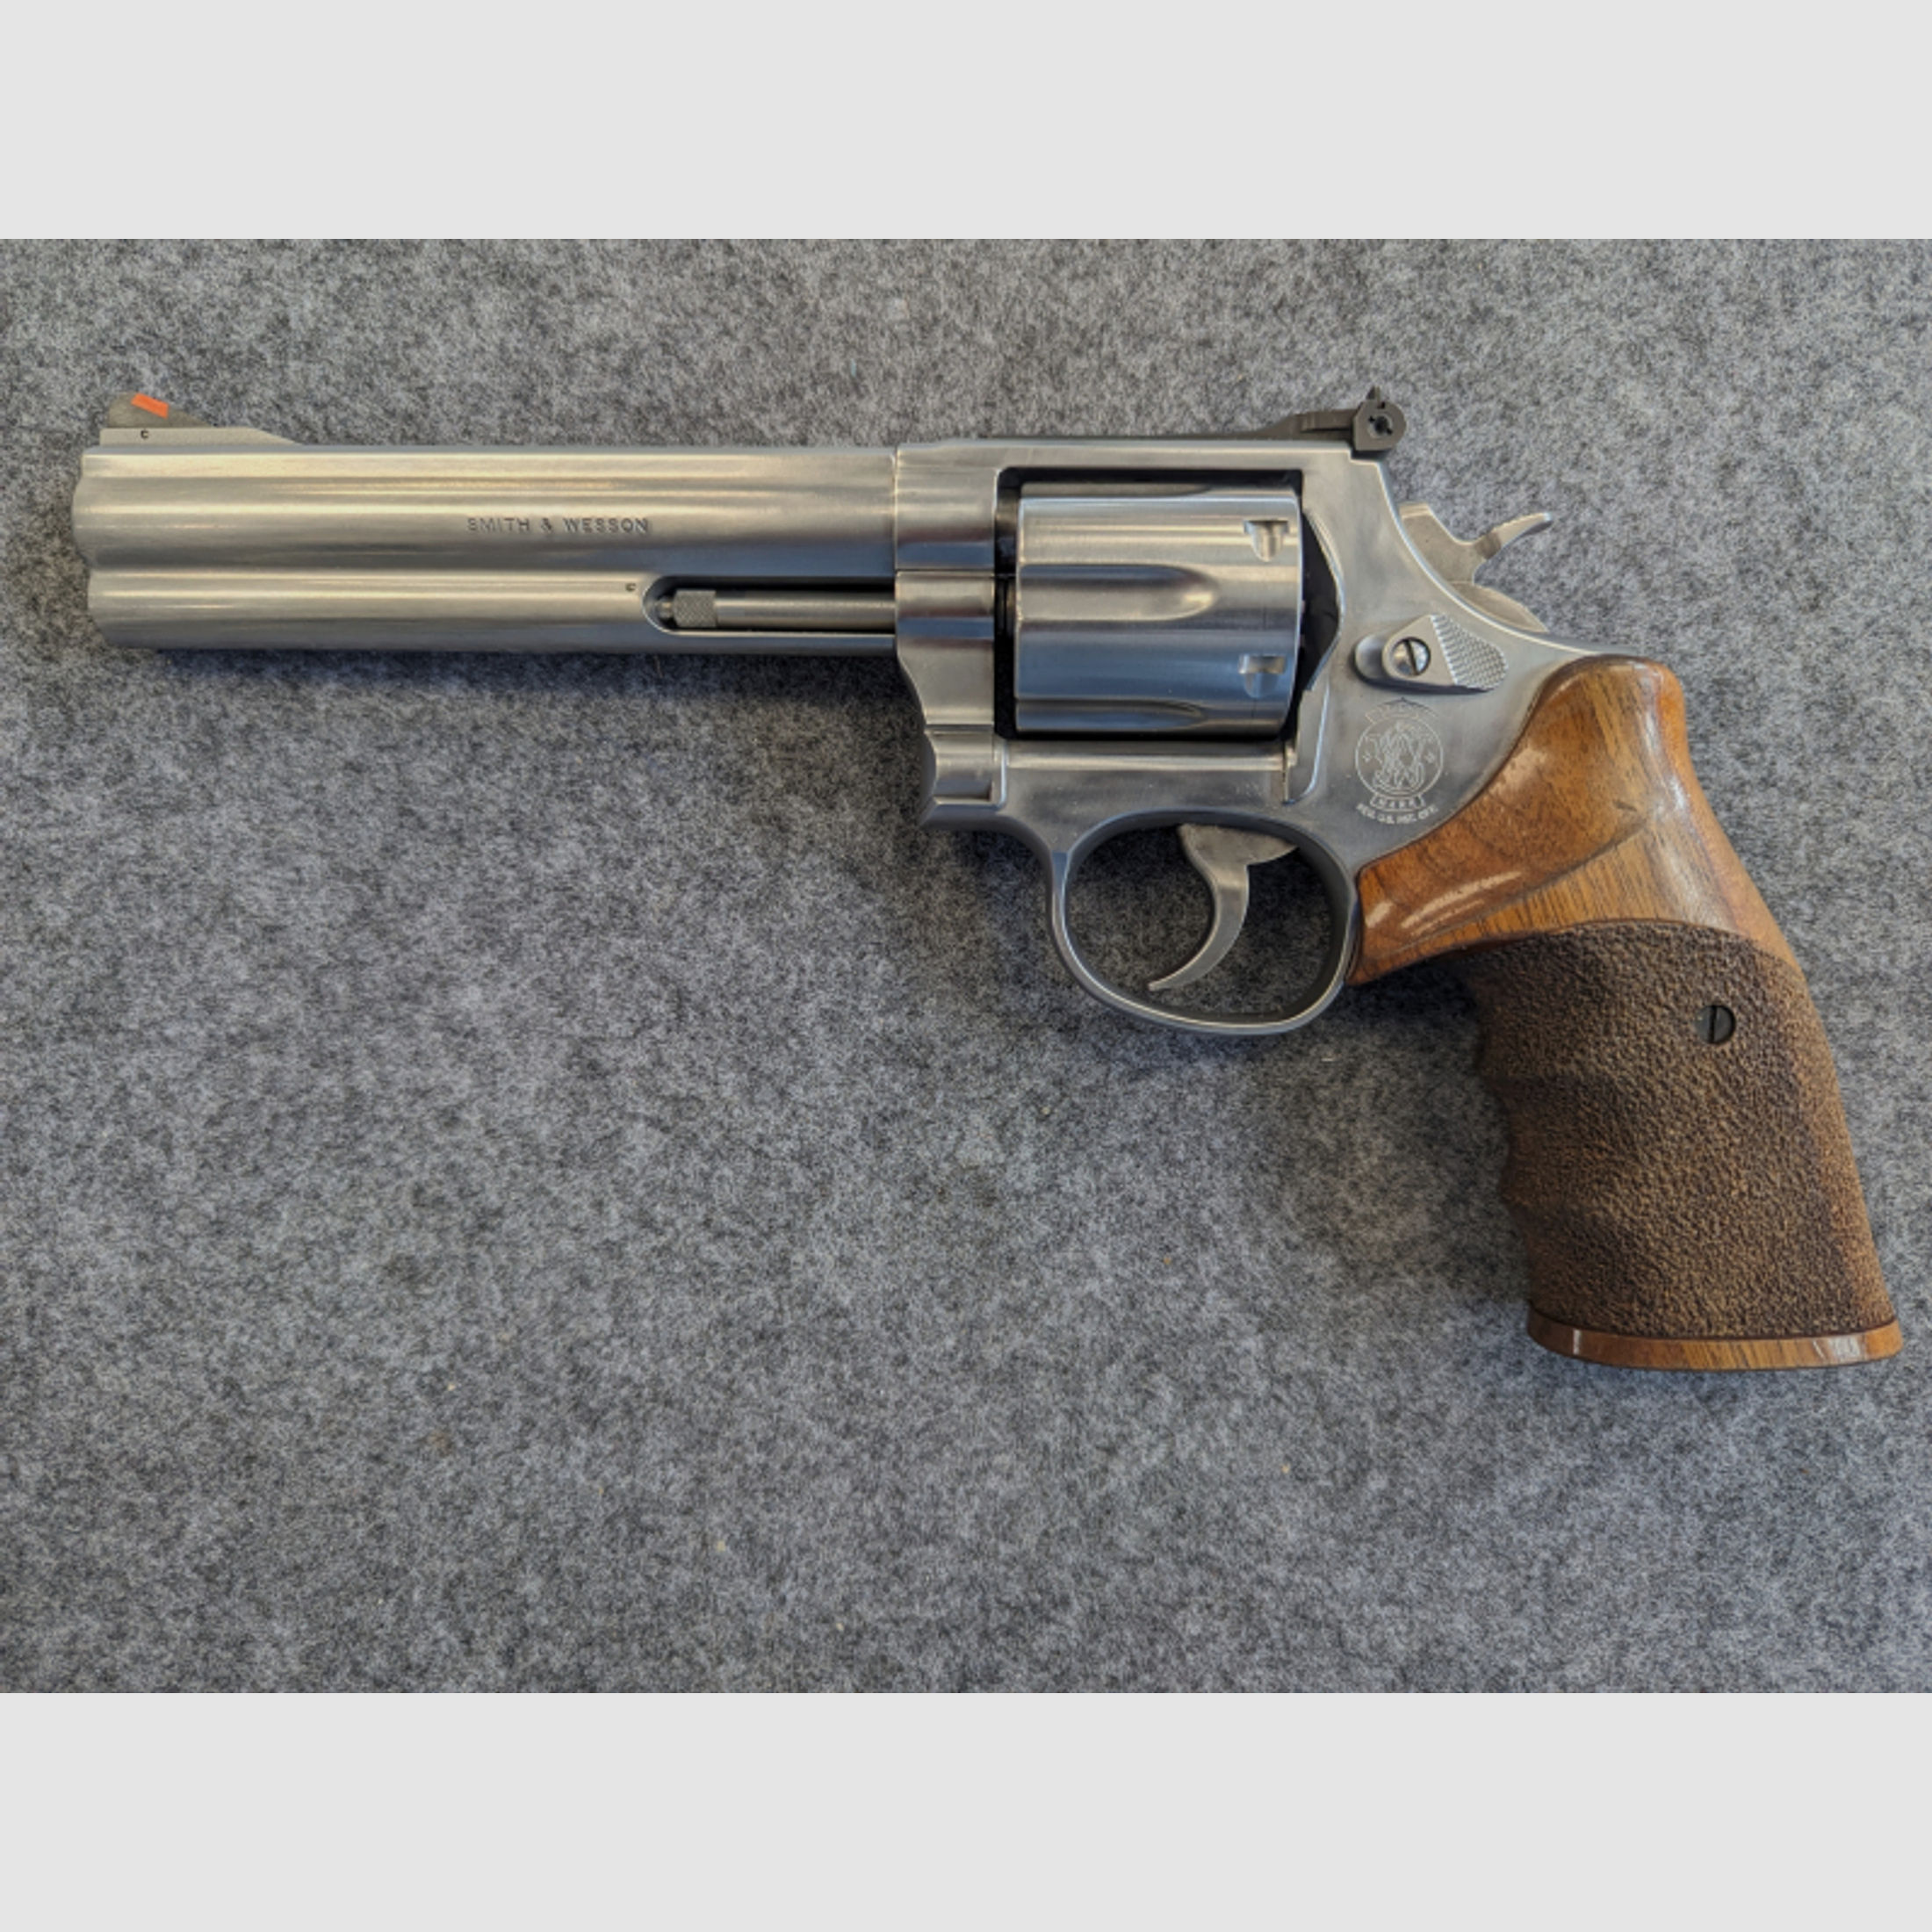 Smith & Wesson Mod. 686-5 6 Zoll Kal. 357Magnum